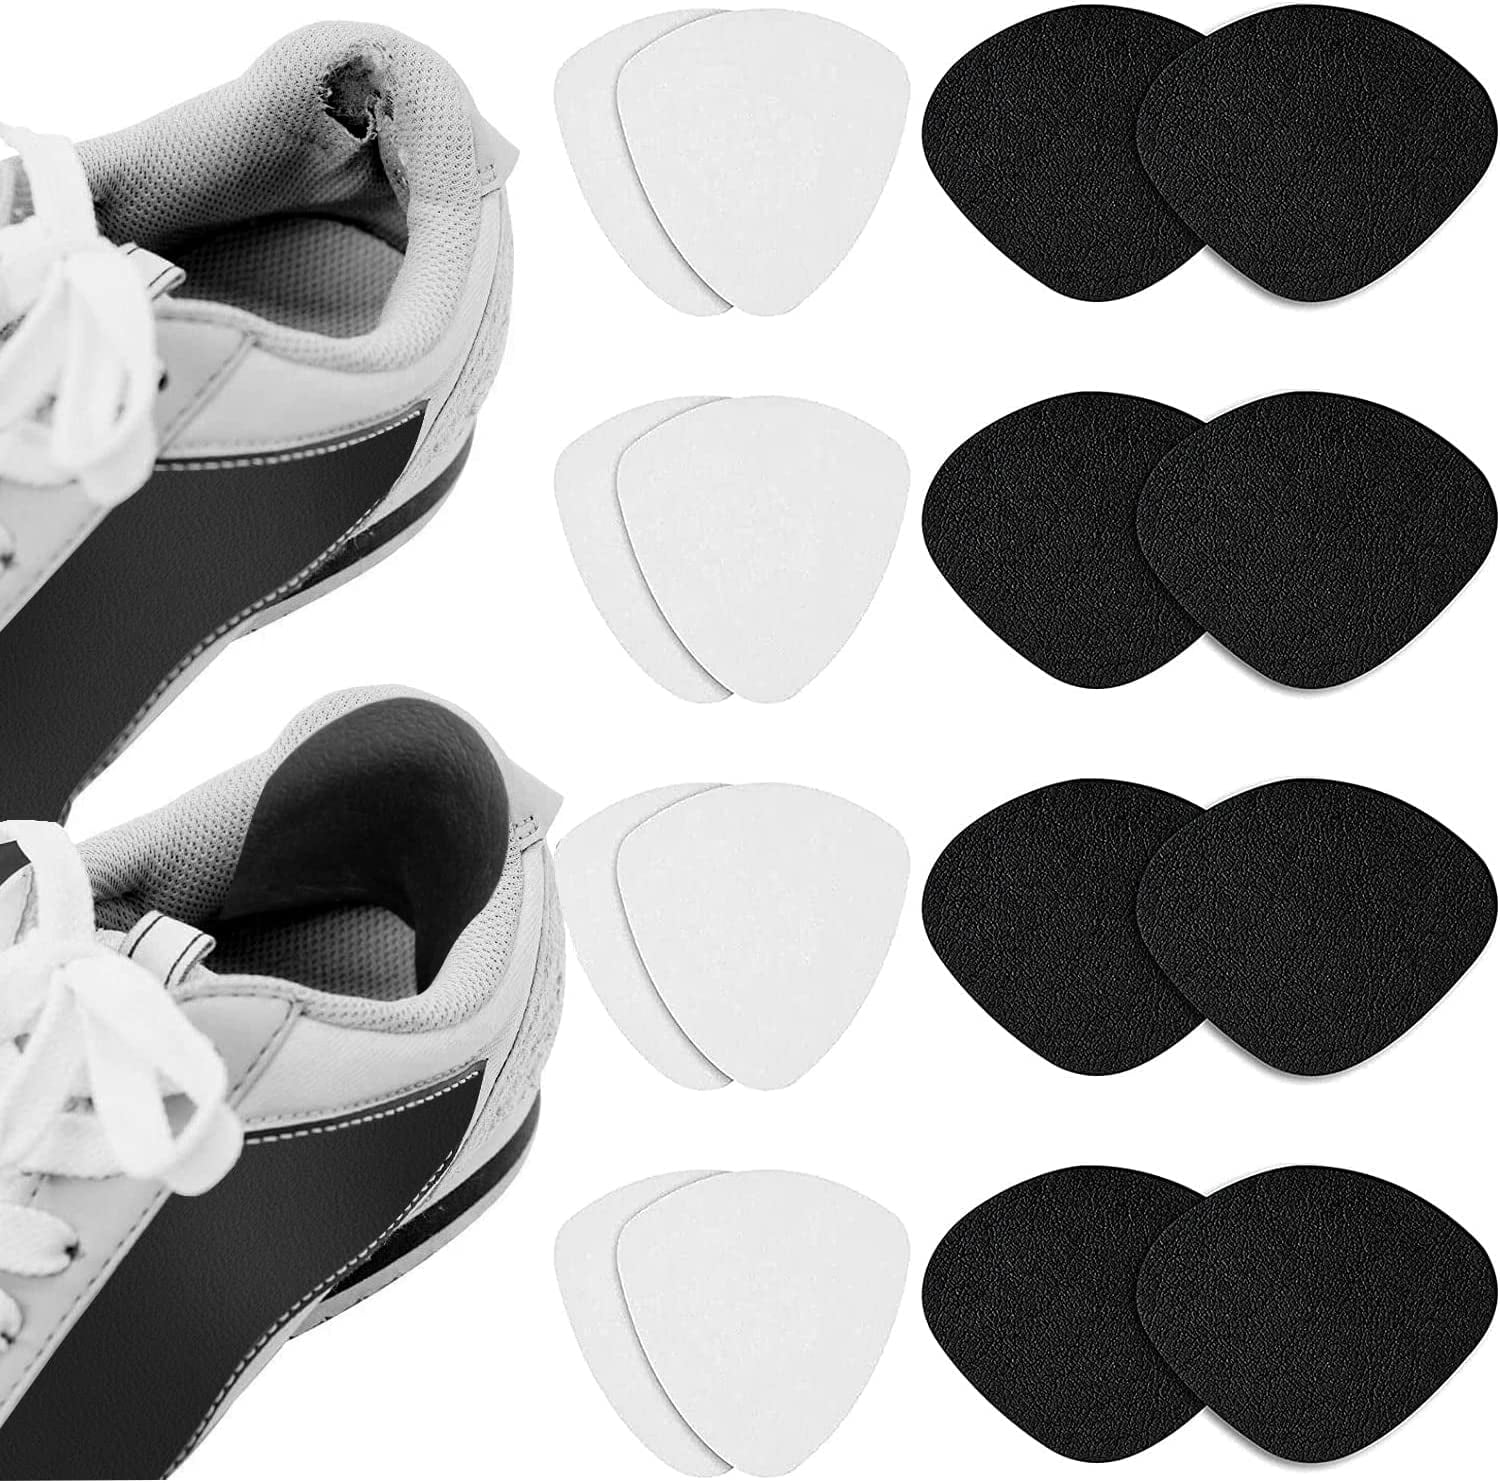 6 Pair Shoe Heel Repair, 6 Pairs Self-Adhesive Inside Shoe Patches for  Holes, Shoe Hole Repair Patch Kit for Sneaker, Leather Shoes, High Heels